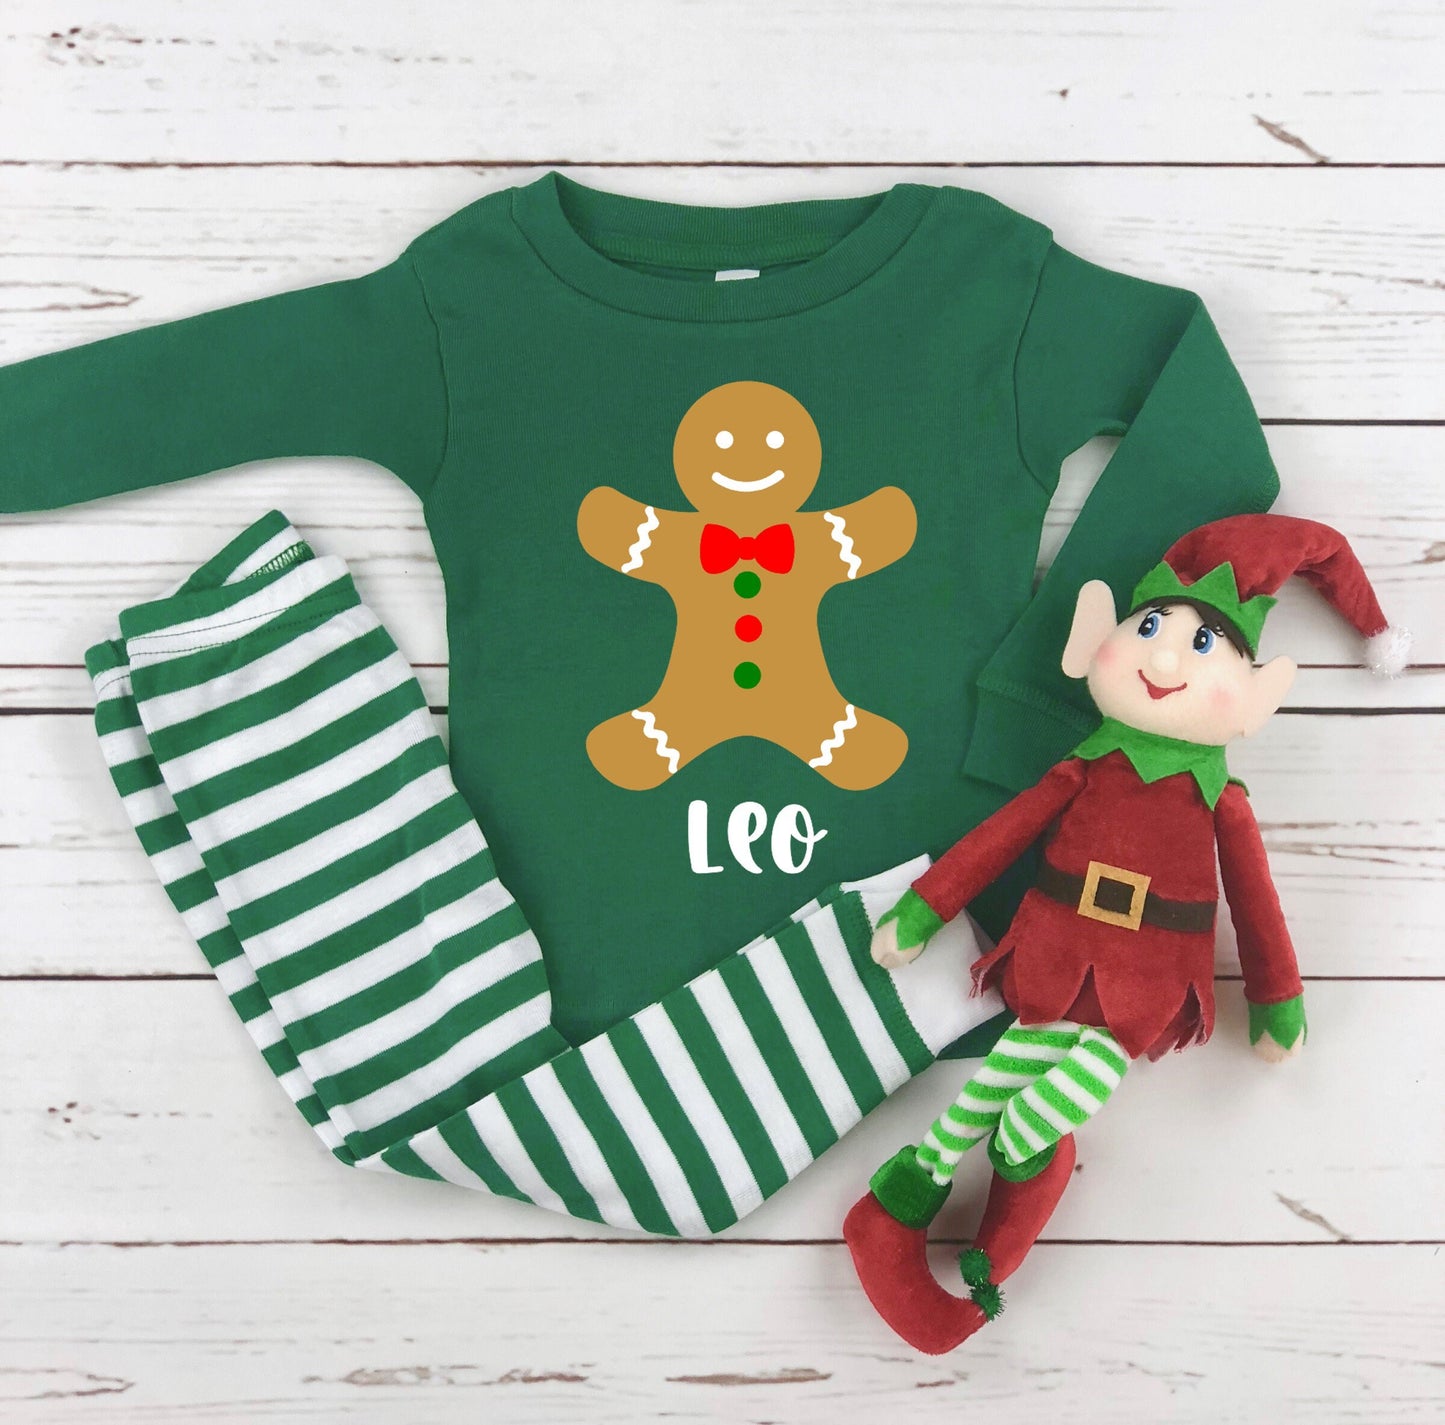 Personalized Gingerbread Green Striped Infant or Kids Christmas Pajamas - kids christmas pjs - baby christmas pjs - matching family pjs